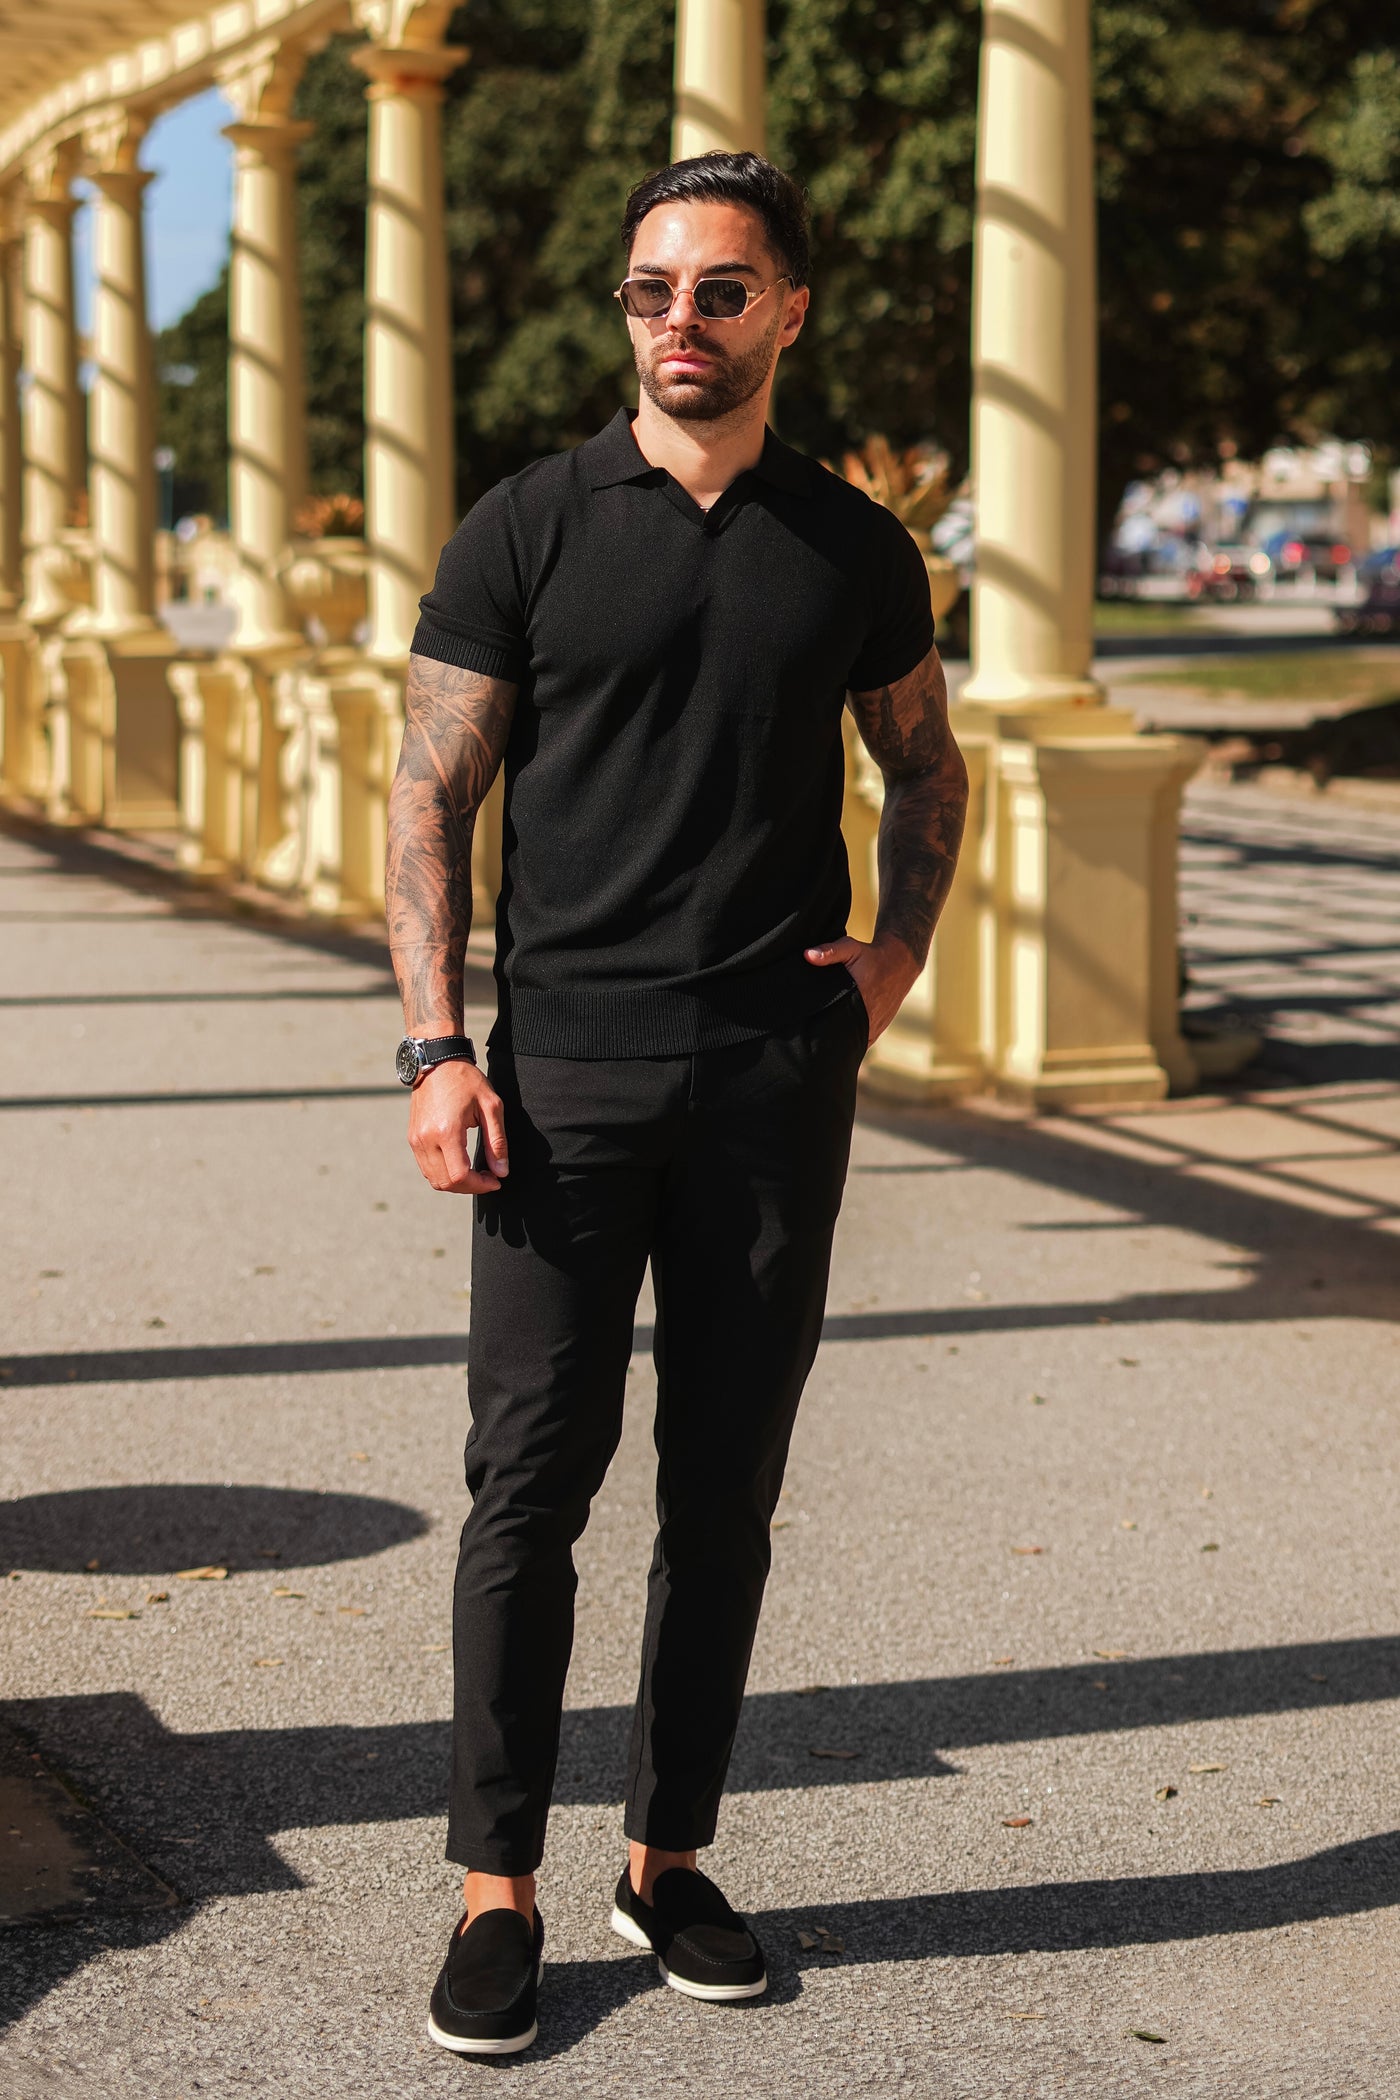 THE SLIM FIT TROUSERS - SCHWARZ